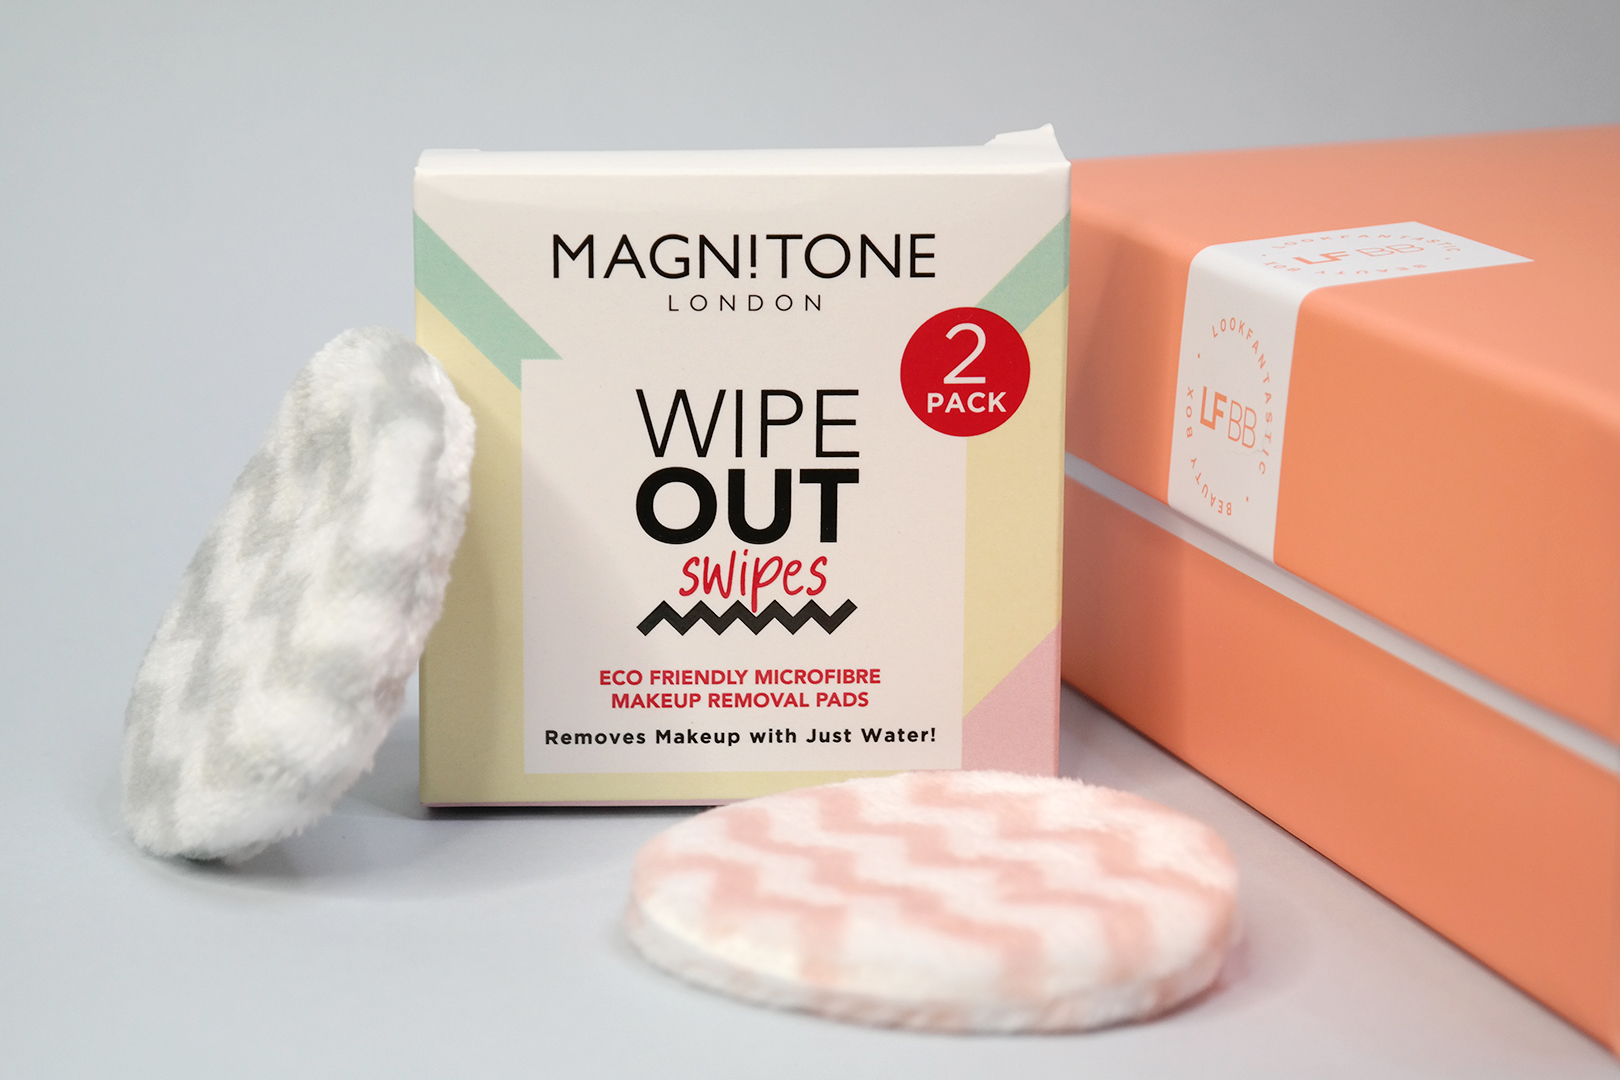 Magn!tone Wipe Out Swipes 2 pack